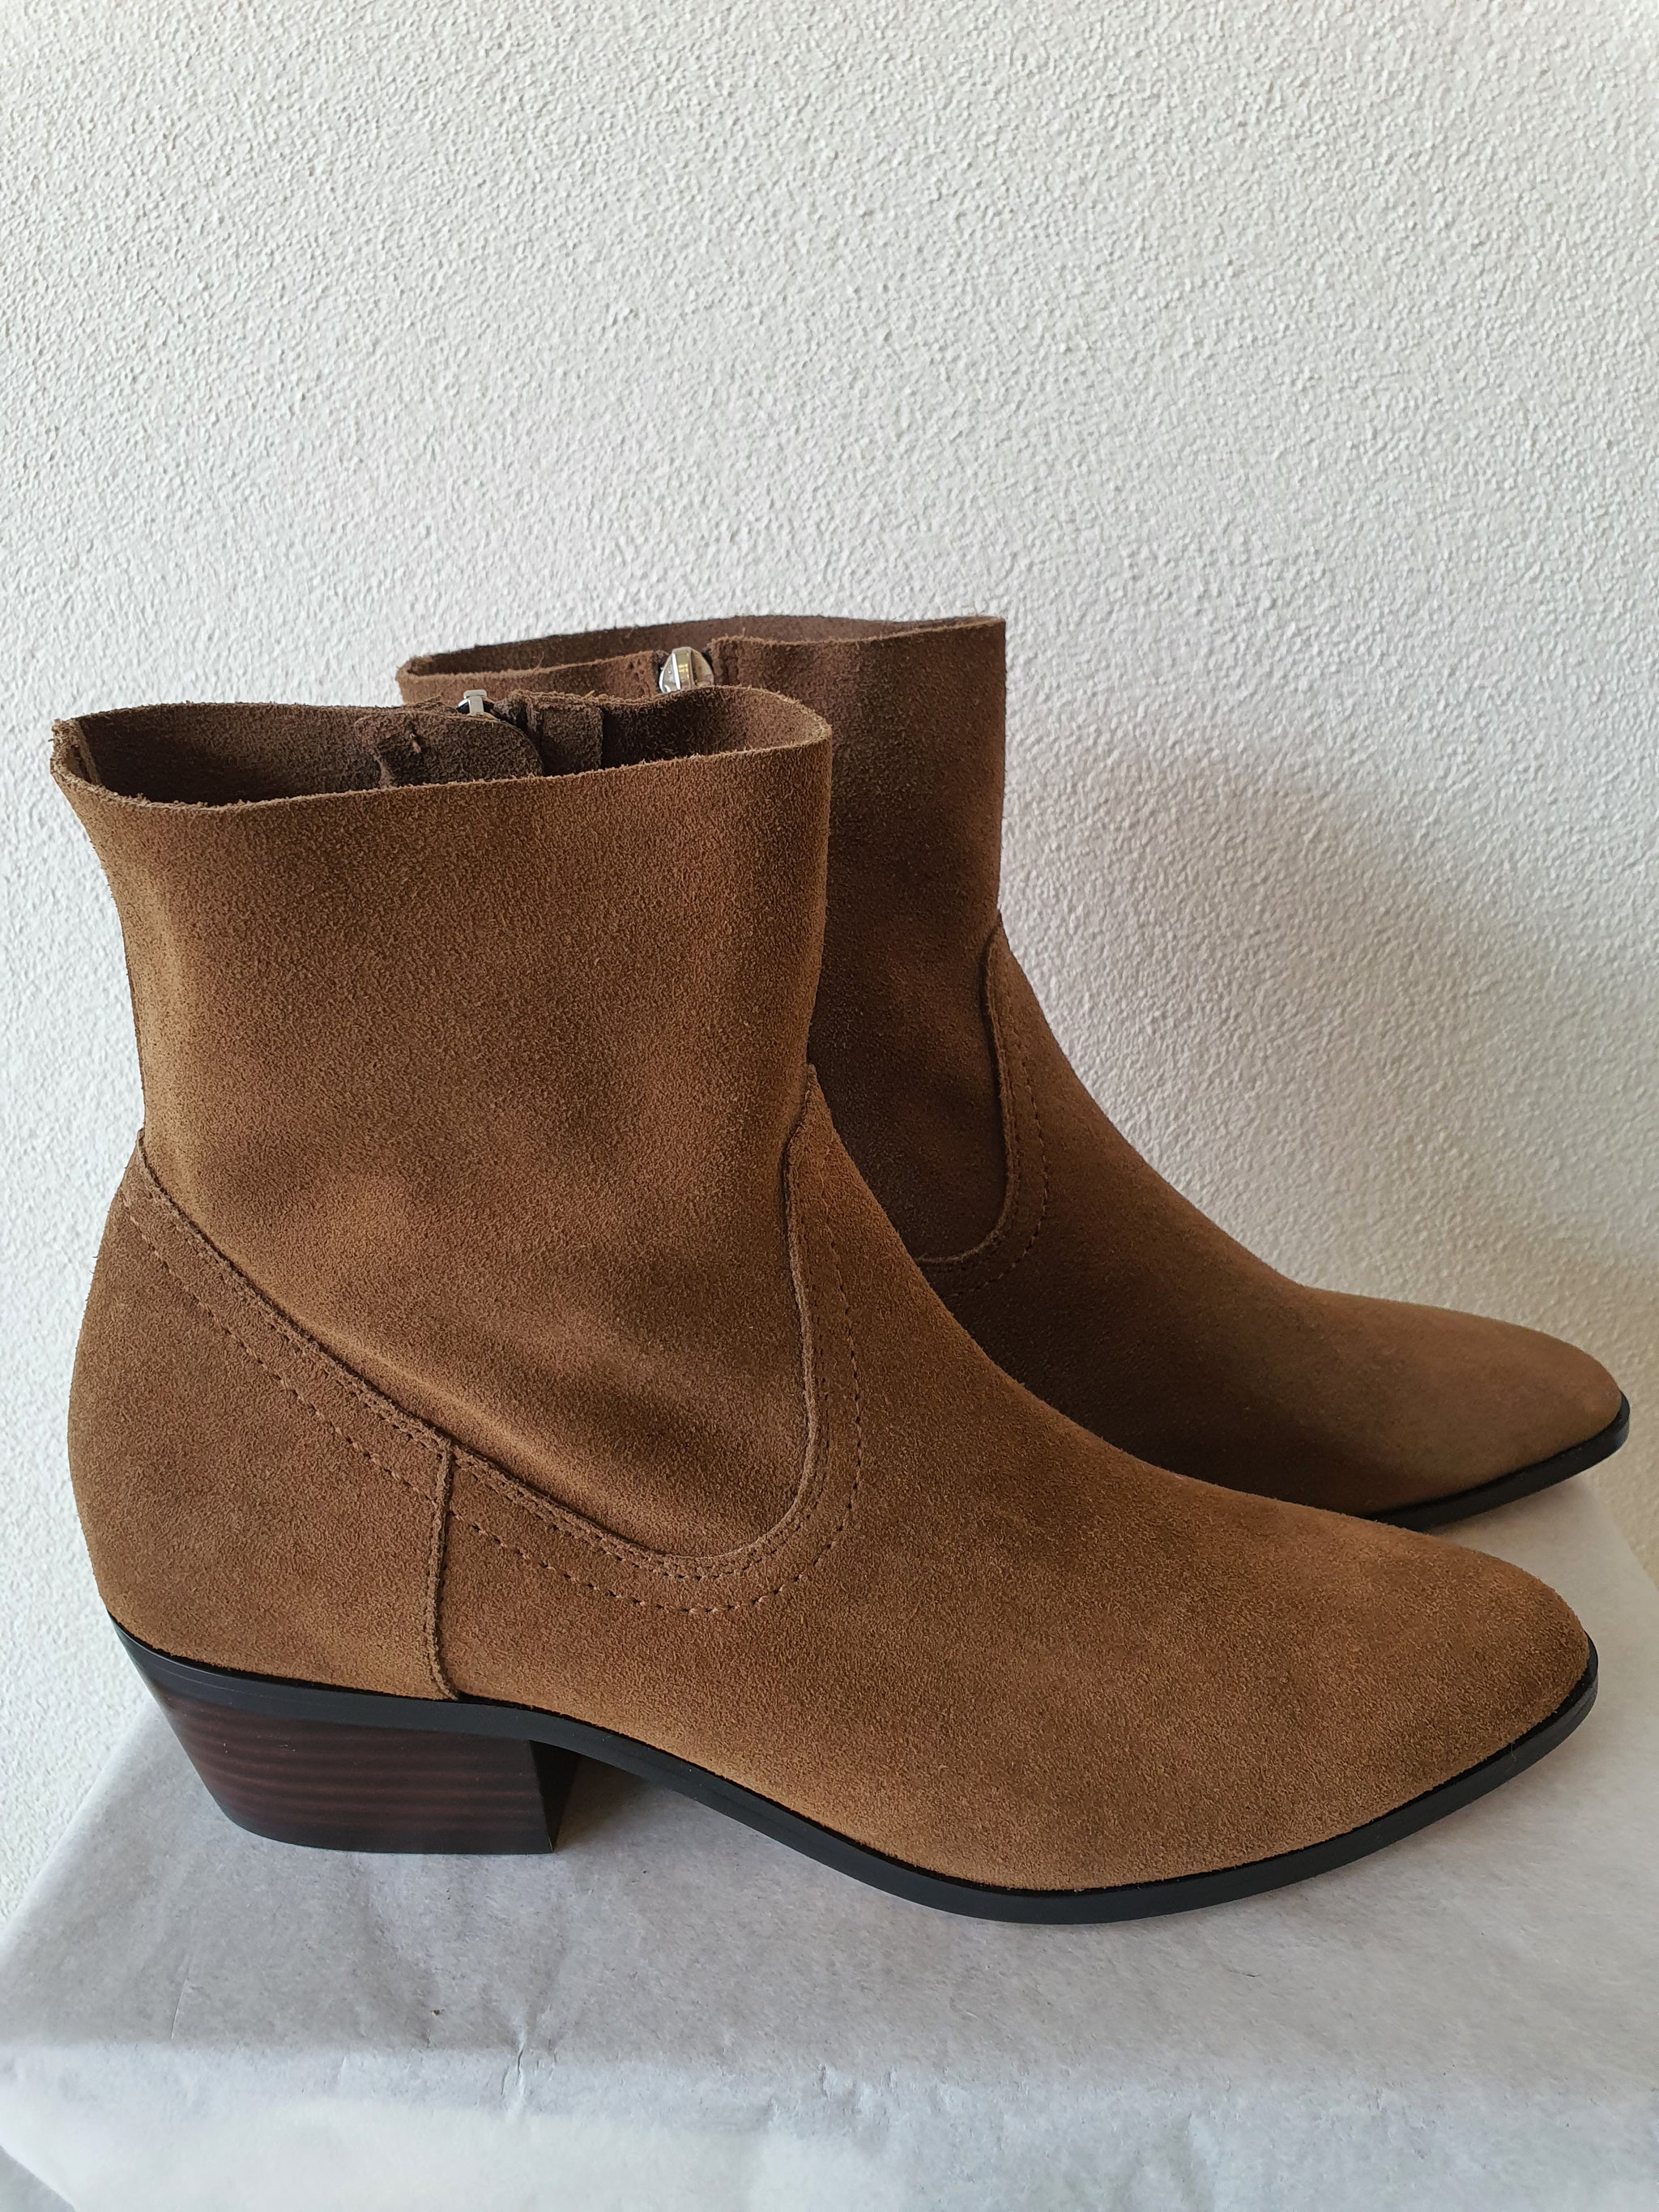 Witchery Brown suede ankle boots 40 - regenerate fashion